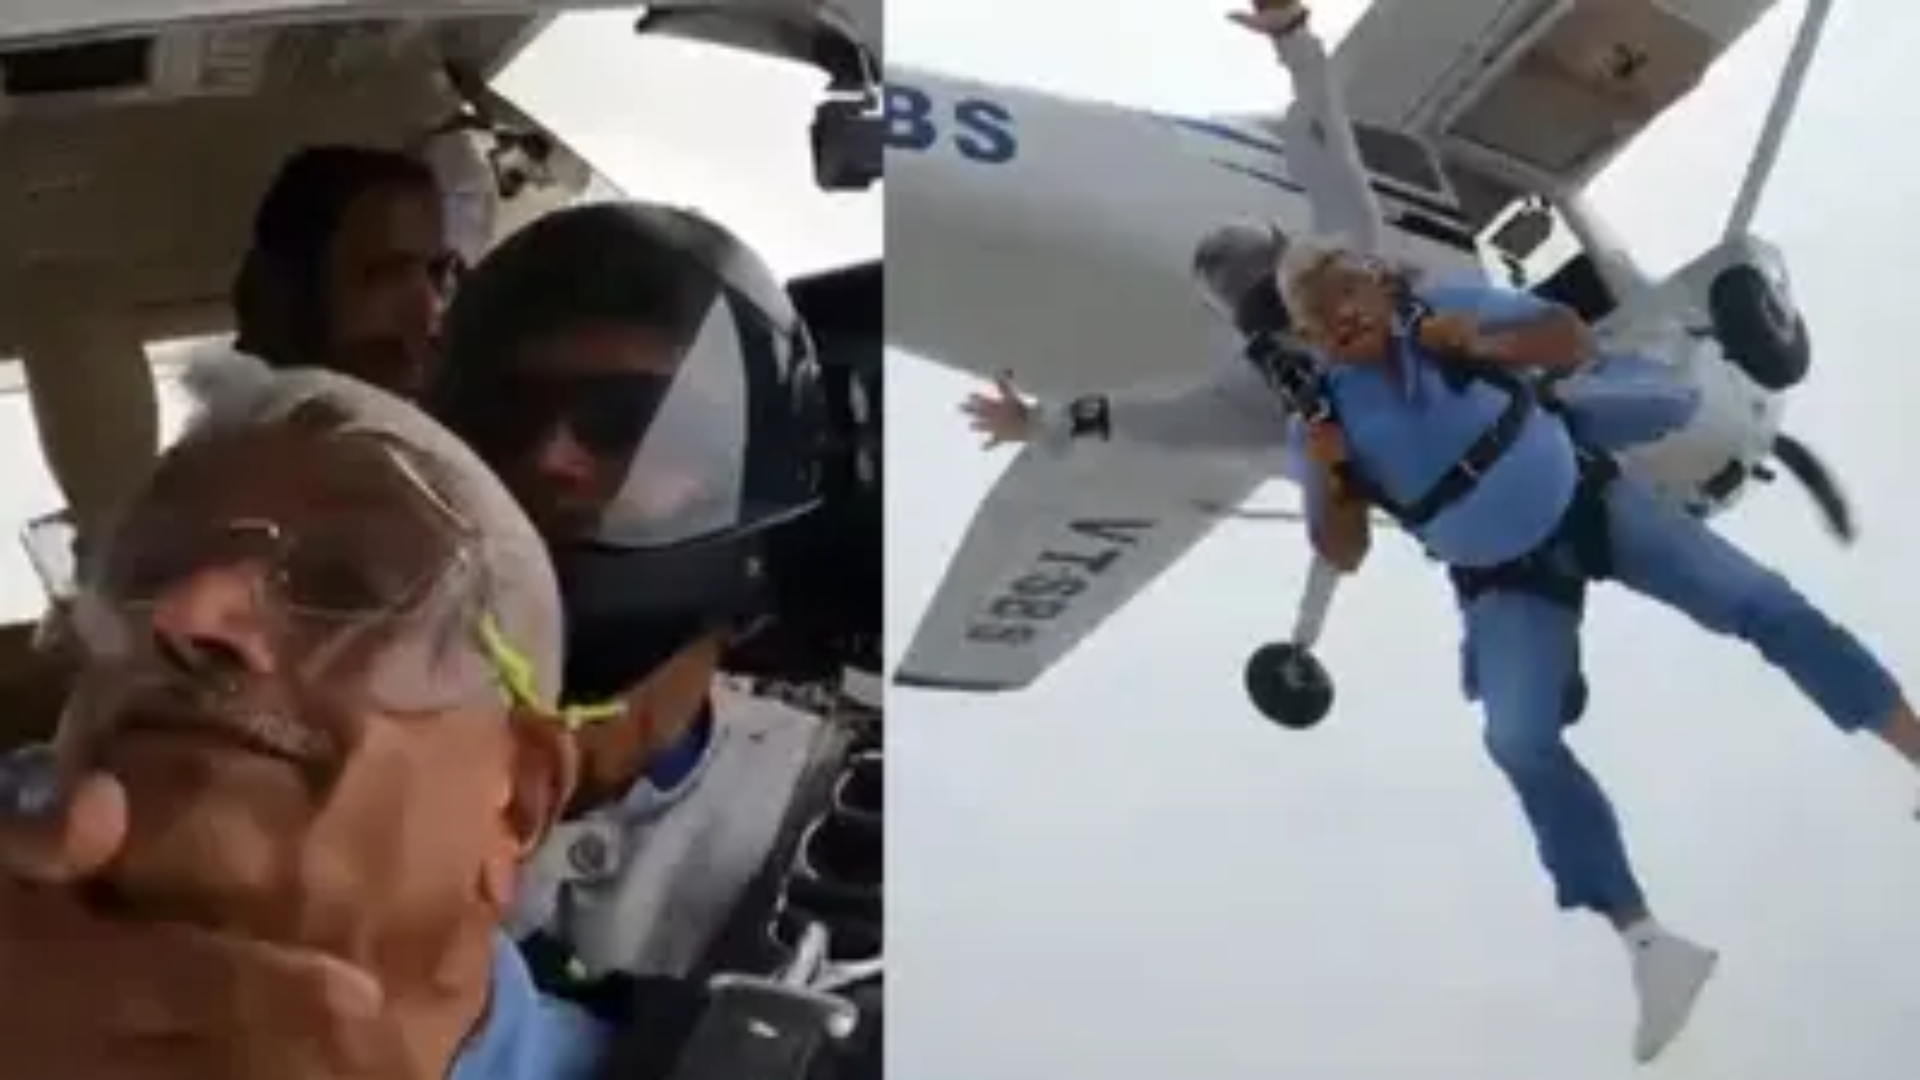 Watch- Union Tourism Minister Skydives In Haryana On Skydiving Day